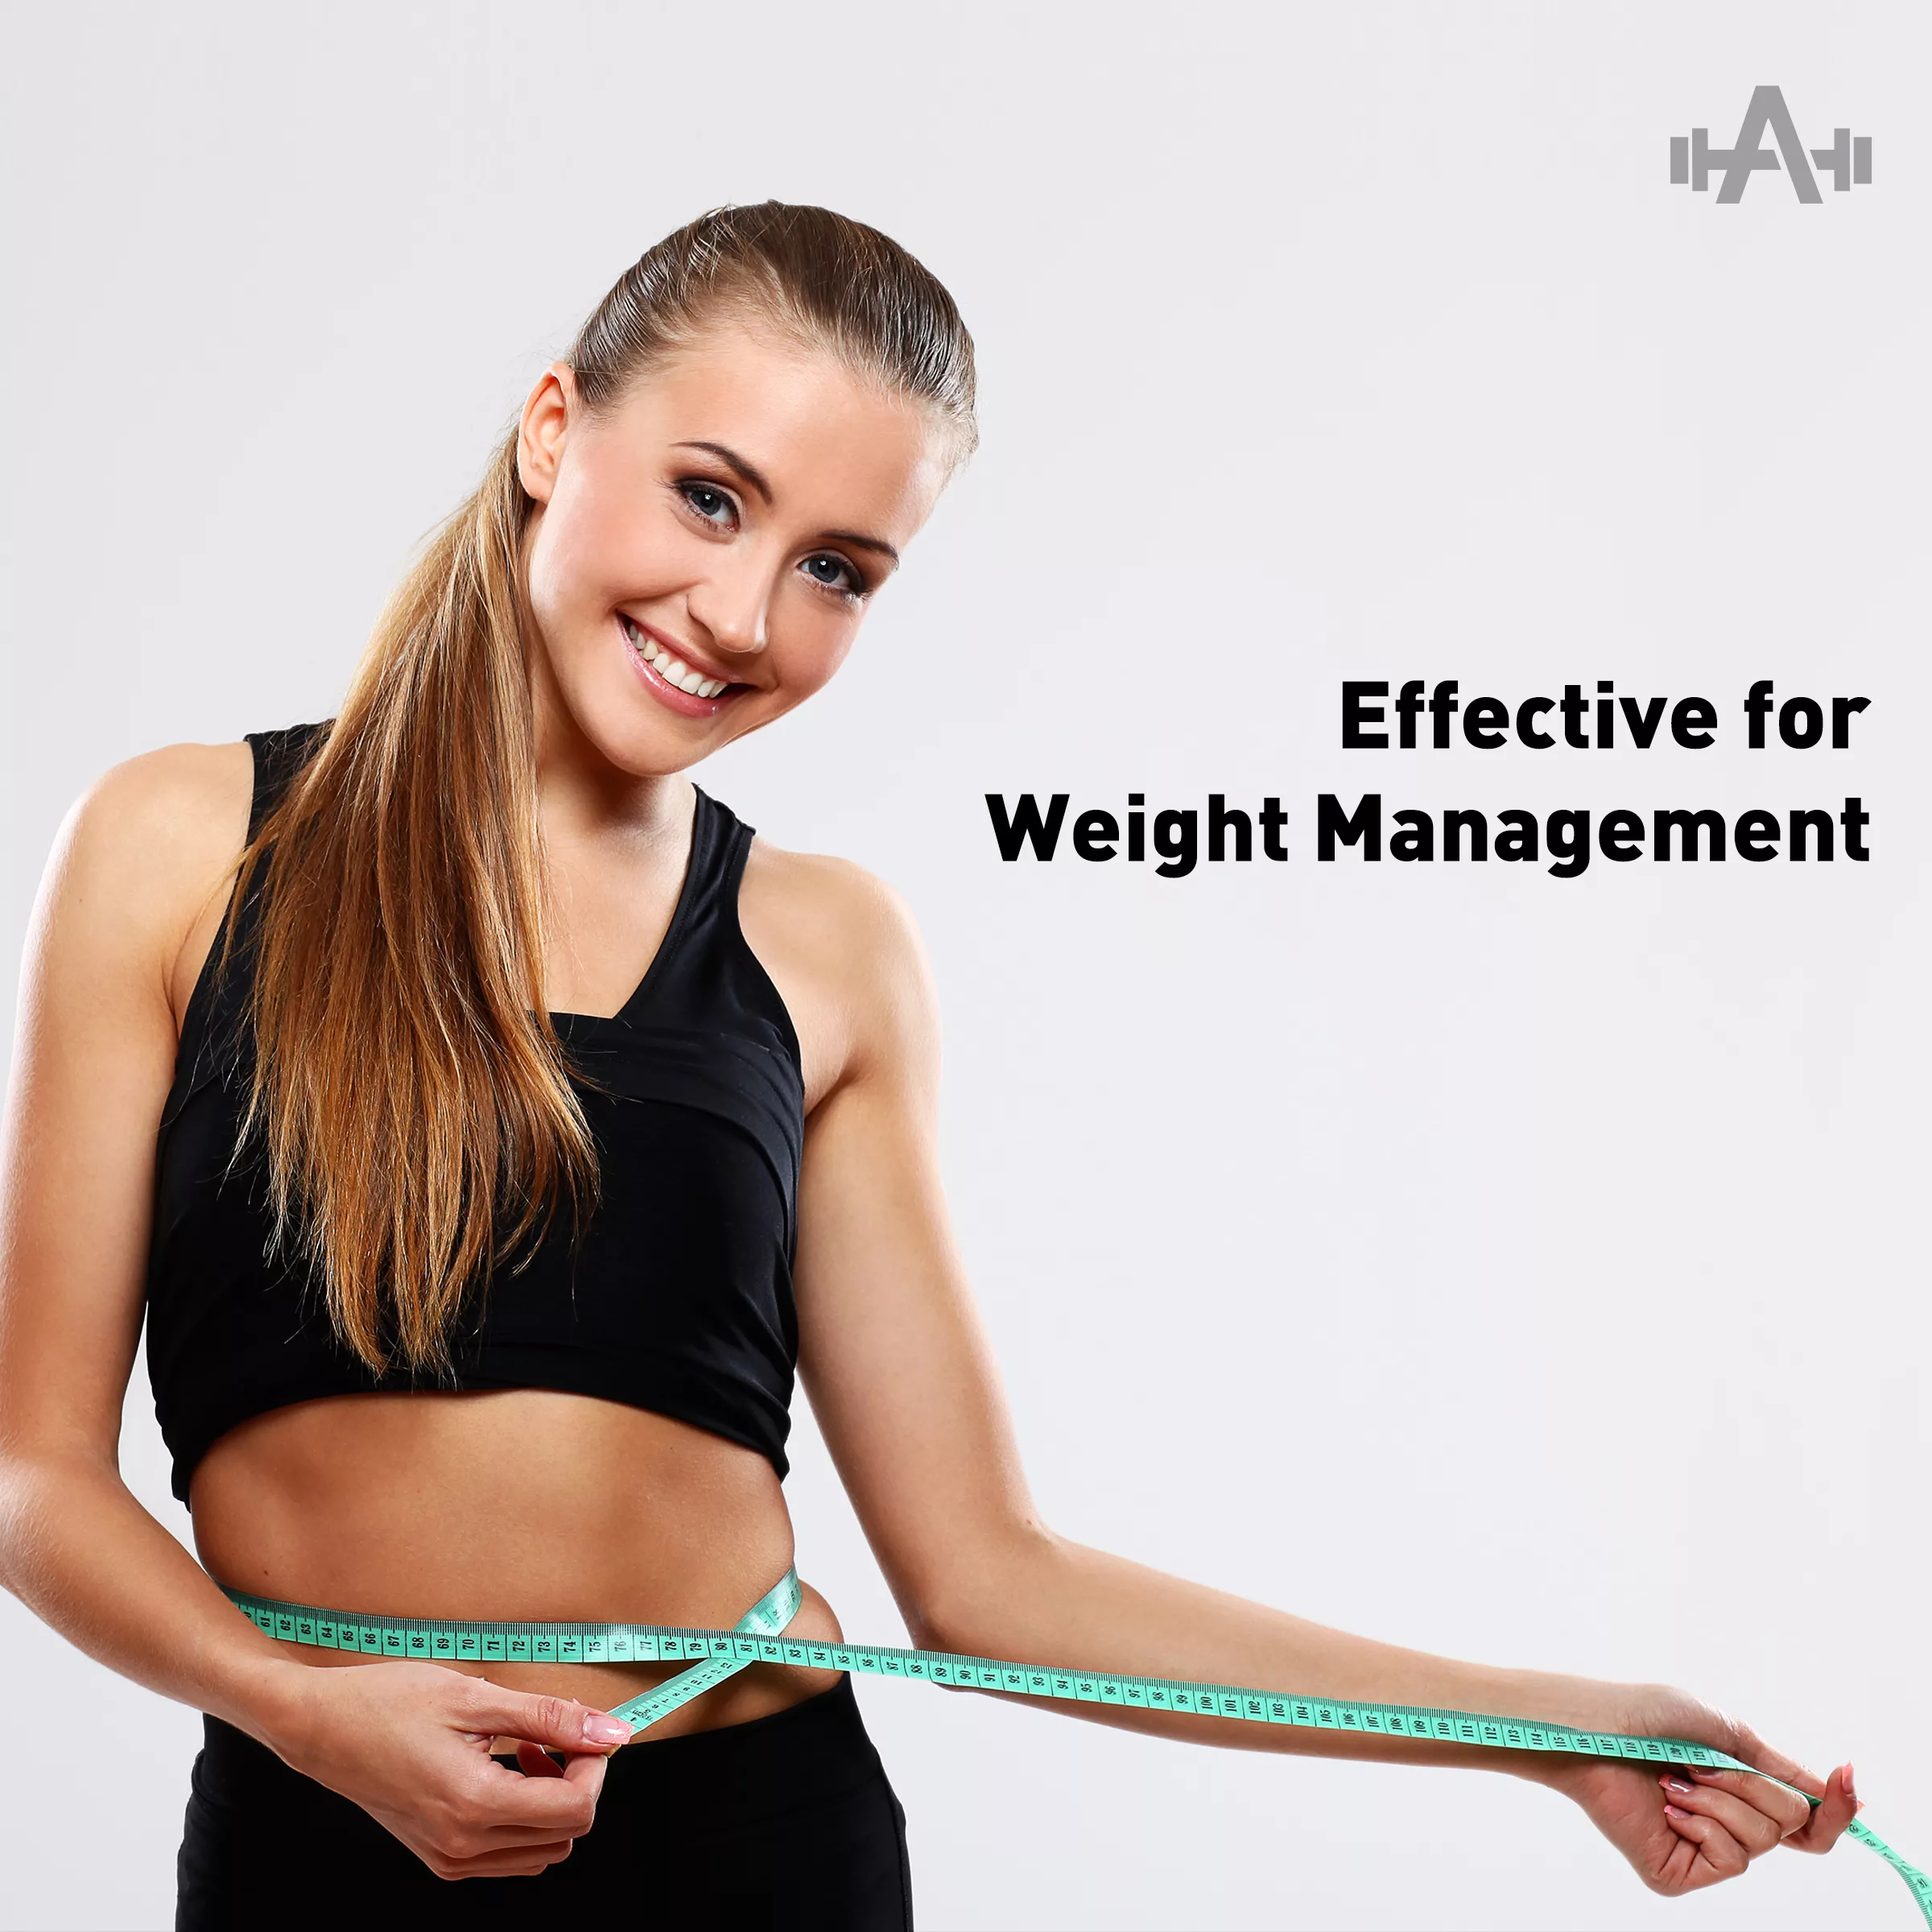 Effective for Weight Management